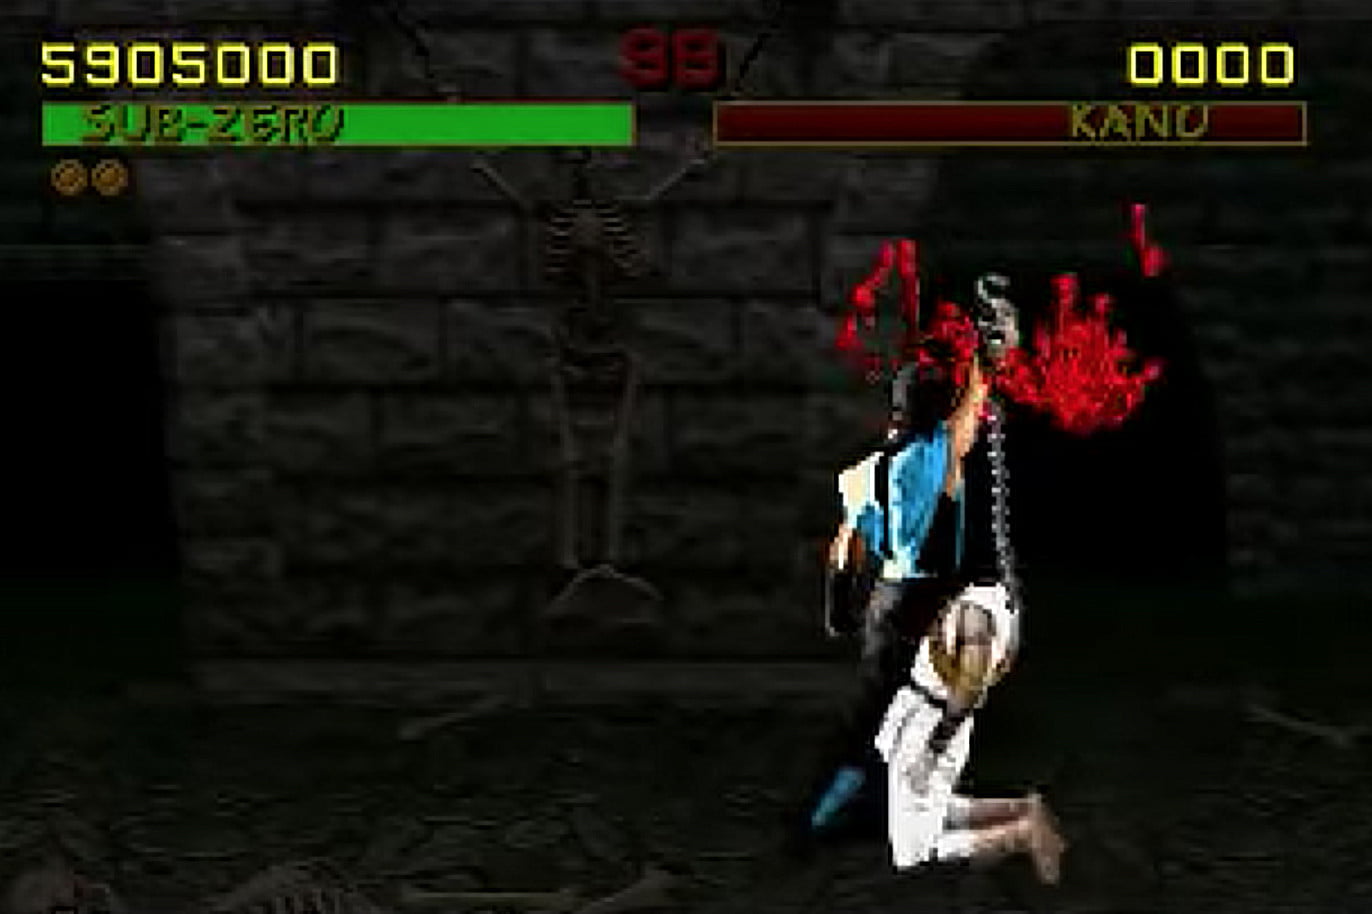 Mortal Kombat Movie Will Be R-Rated And Feature Fatalities